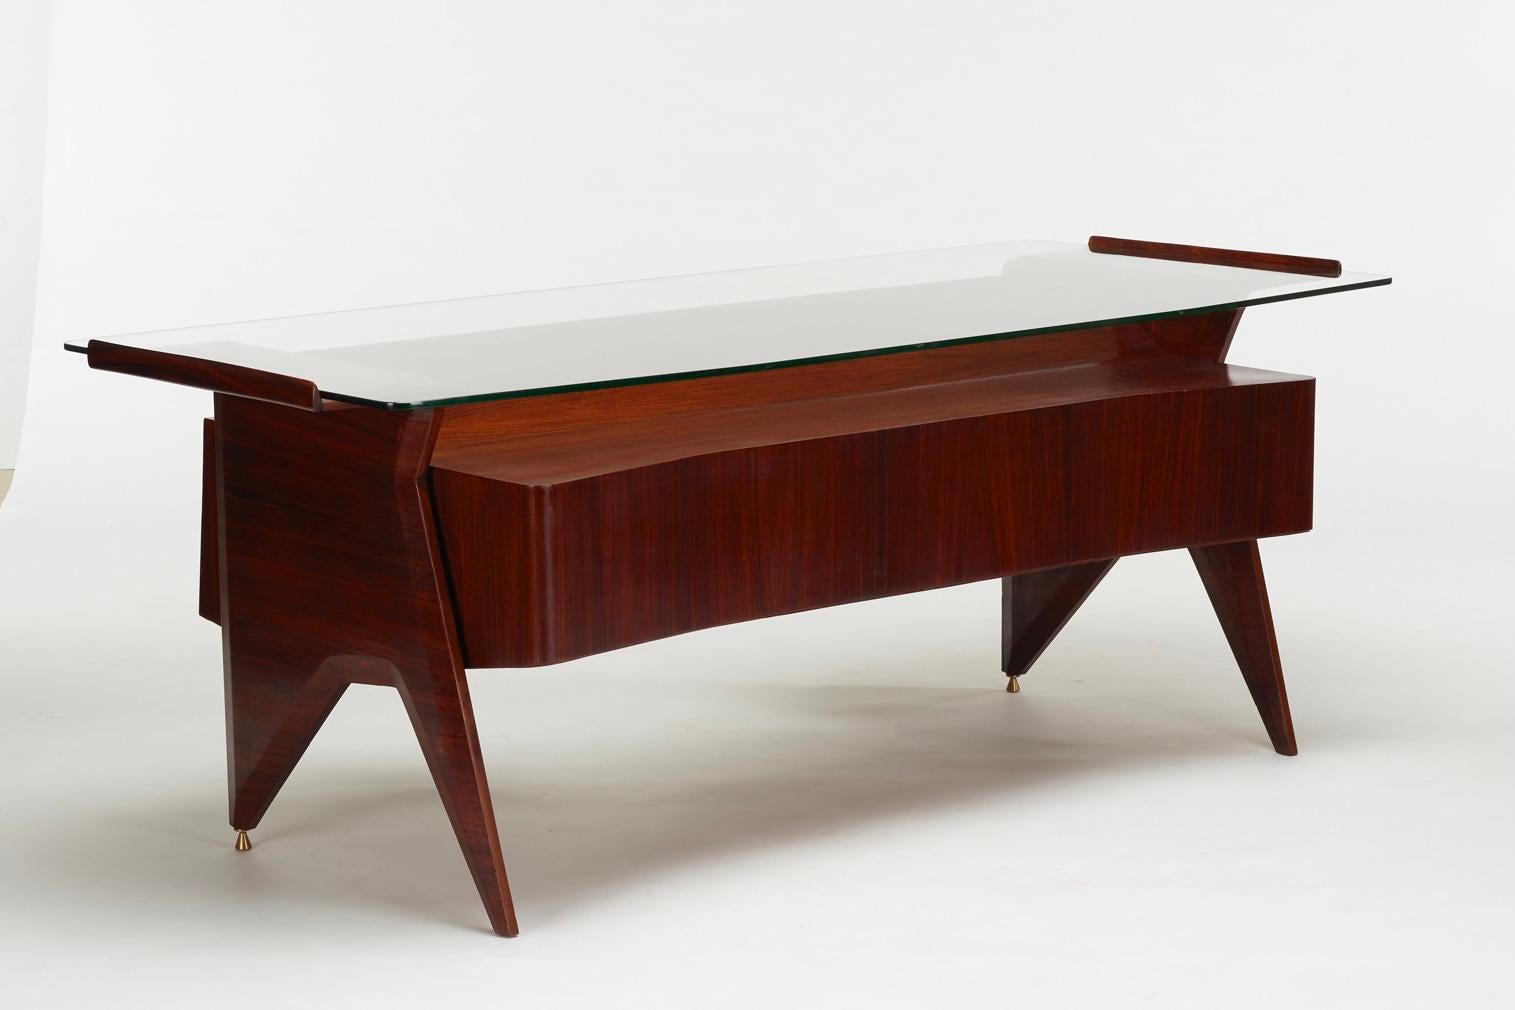 Italian Important Desk by Gio Ponti for the offices of Fontana Arte.